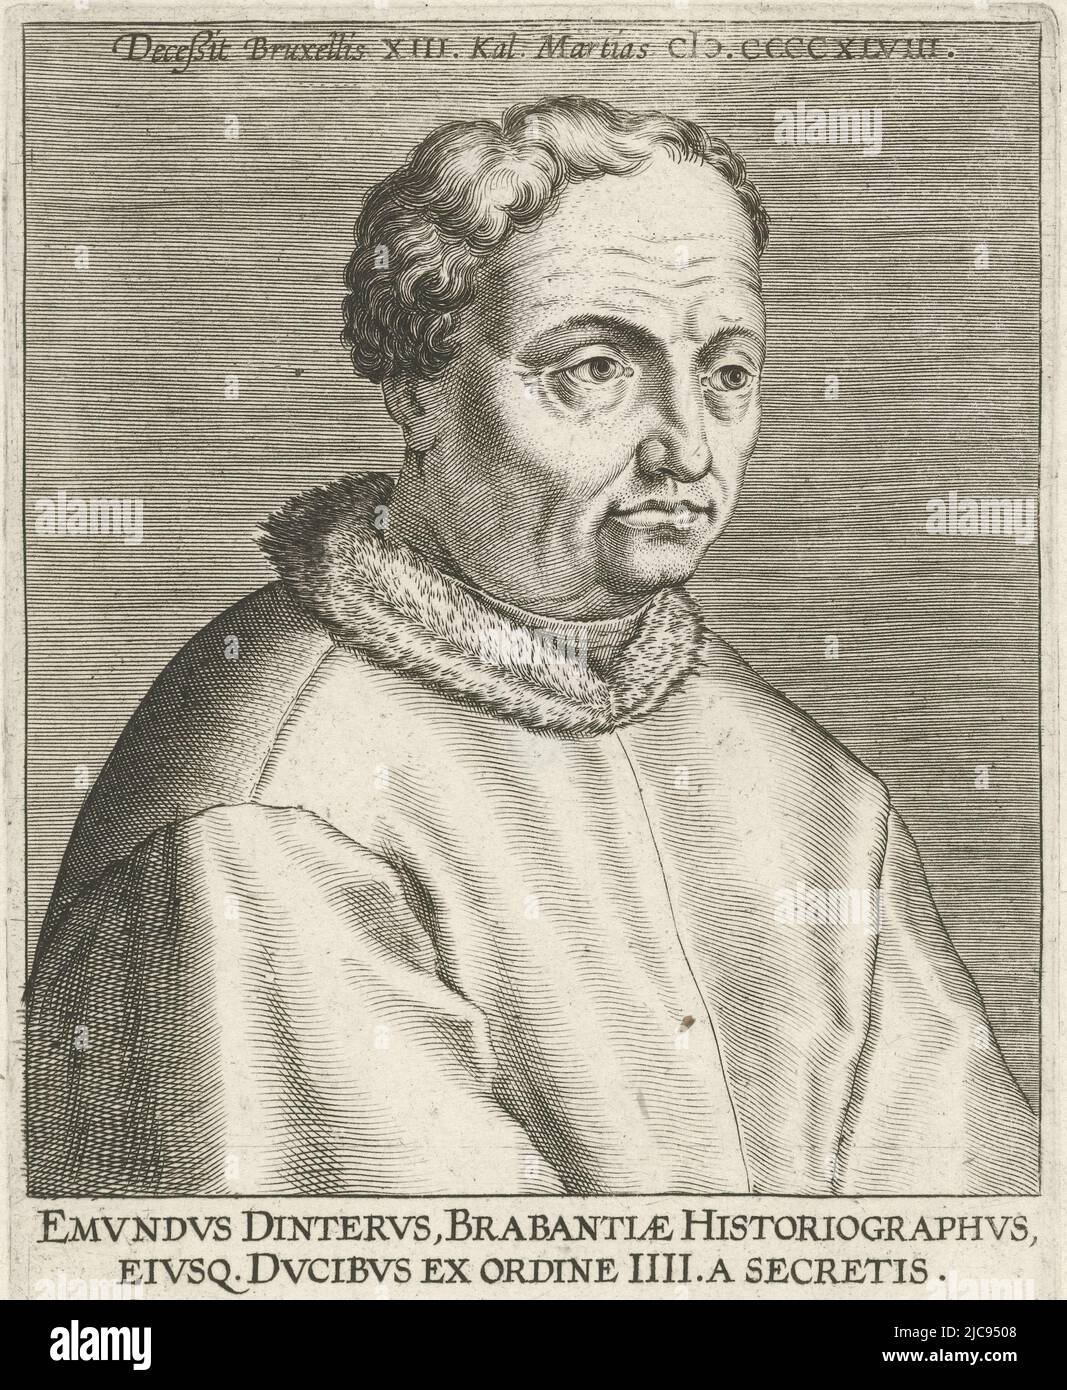 Portrait of Edmund van Dinter. Diplomat and historian. Bust to the right. The print has a Latin top and caption and is part of a series of famous Dutch and Flemish scholars, Portrait of Edmund van Dinter Emvndvs Dintervs Portraits of famous Dutch and Flemish scholars Illustrium Galliae Belgicae scriptorum icones et elogi , print maker: Philips Galle, (attributed to workshop of), Aubert le Mire, (mentioned on object), publisher: Philips Galle, (possibly), Antwerp, 1604 - 1608, paper, engraving, h 162 mm × w 110 mm Stock Photo